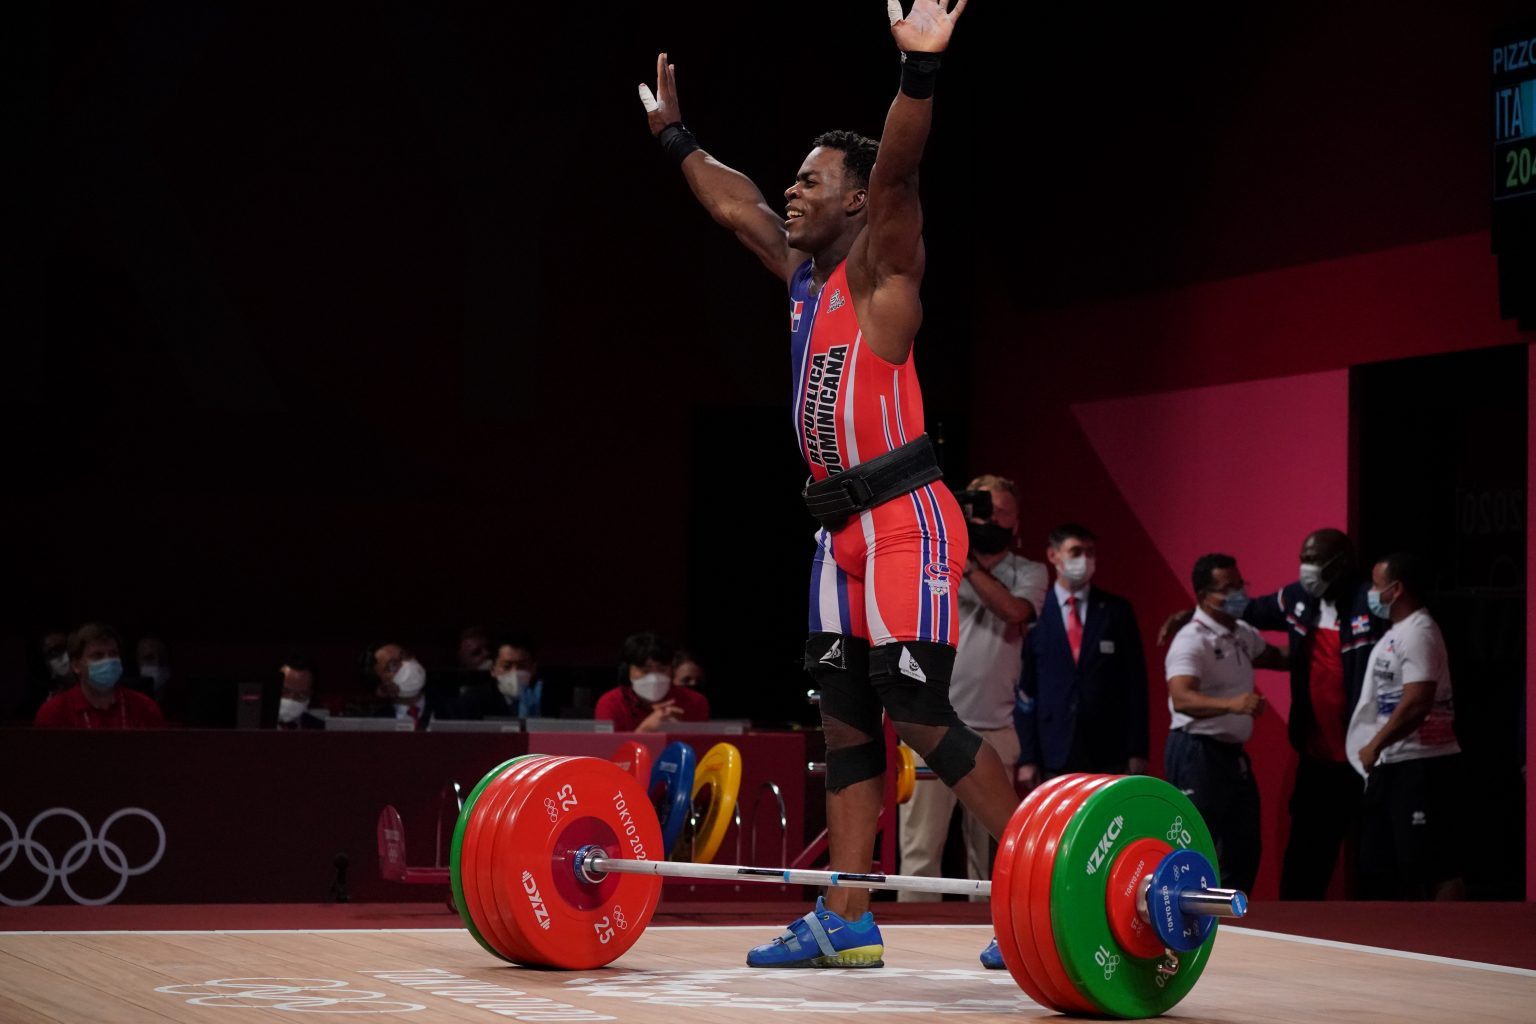 Dominican Republic’s Tokyo 2020 silver medallist Bonnat elected to IWF Athletes’ Commission